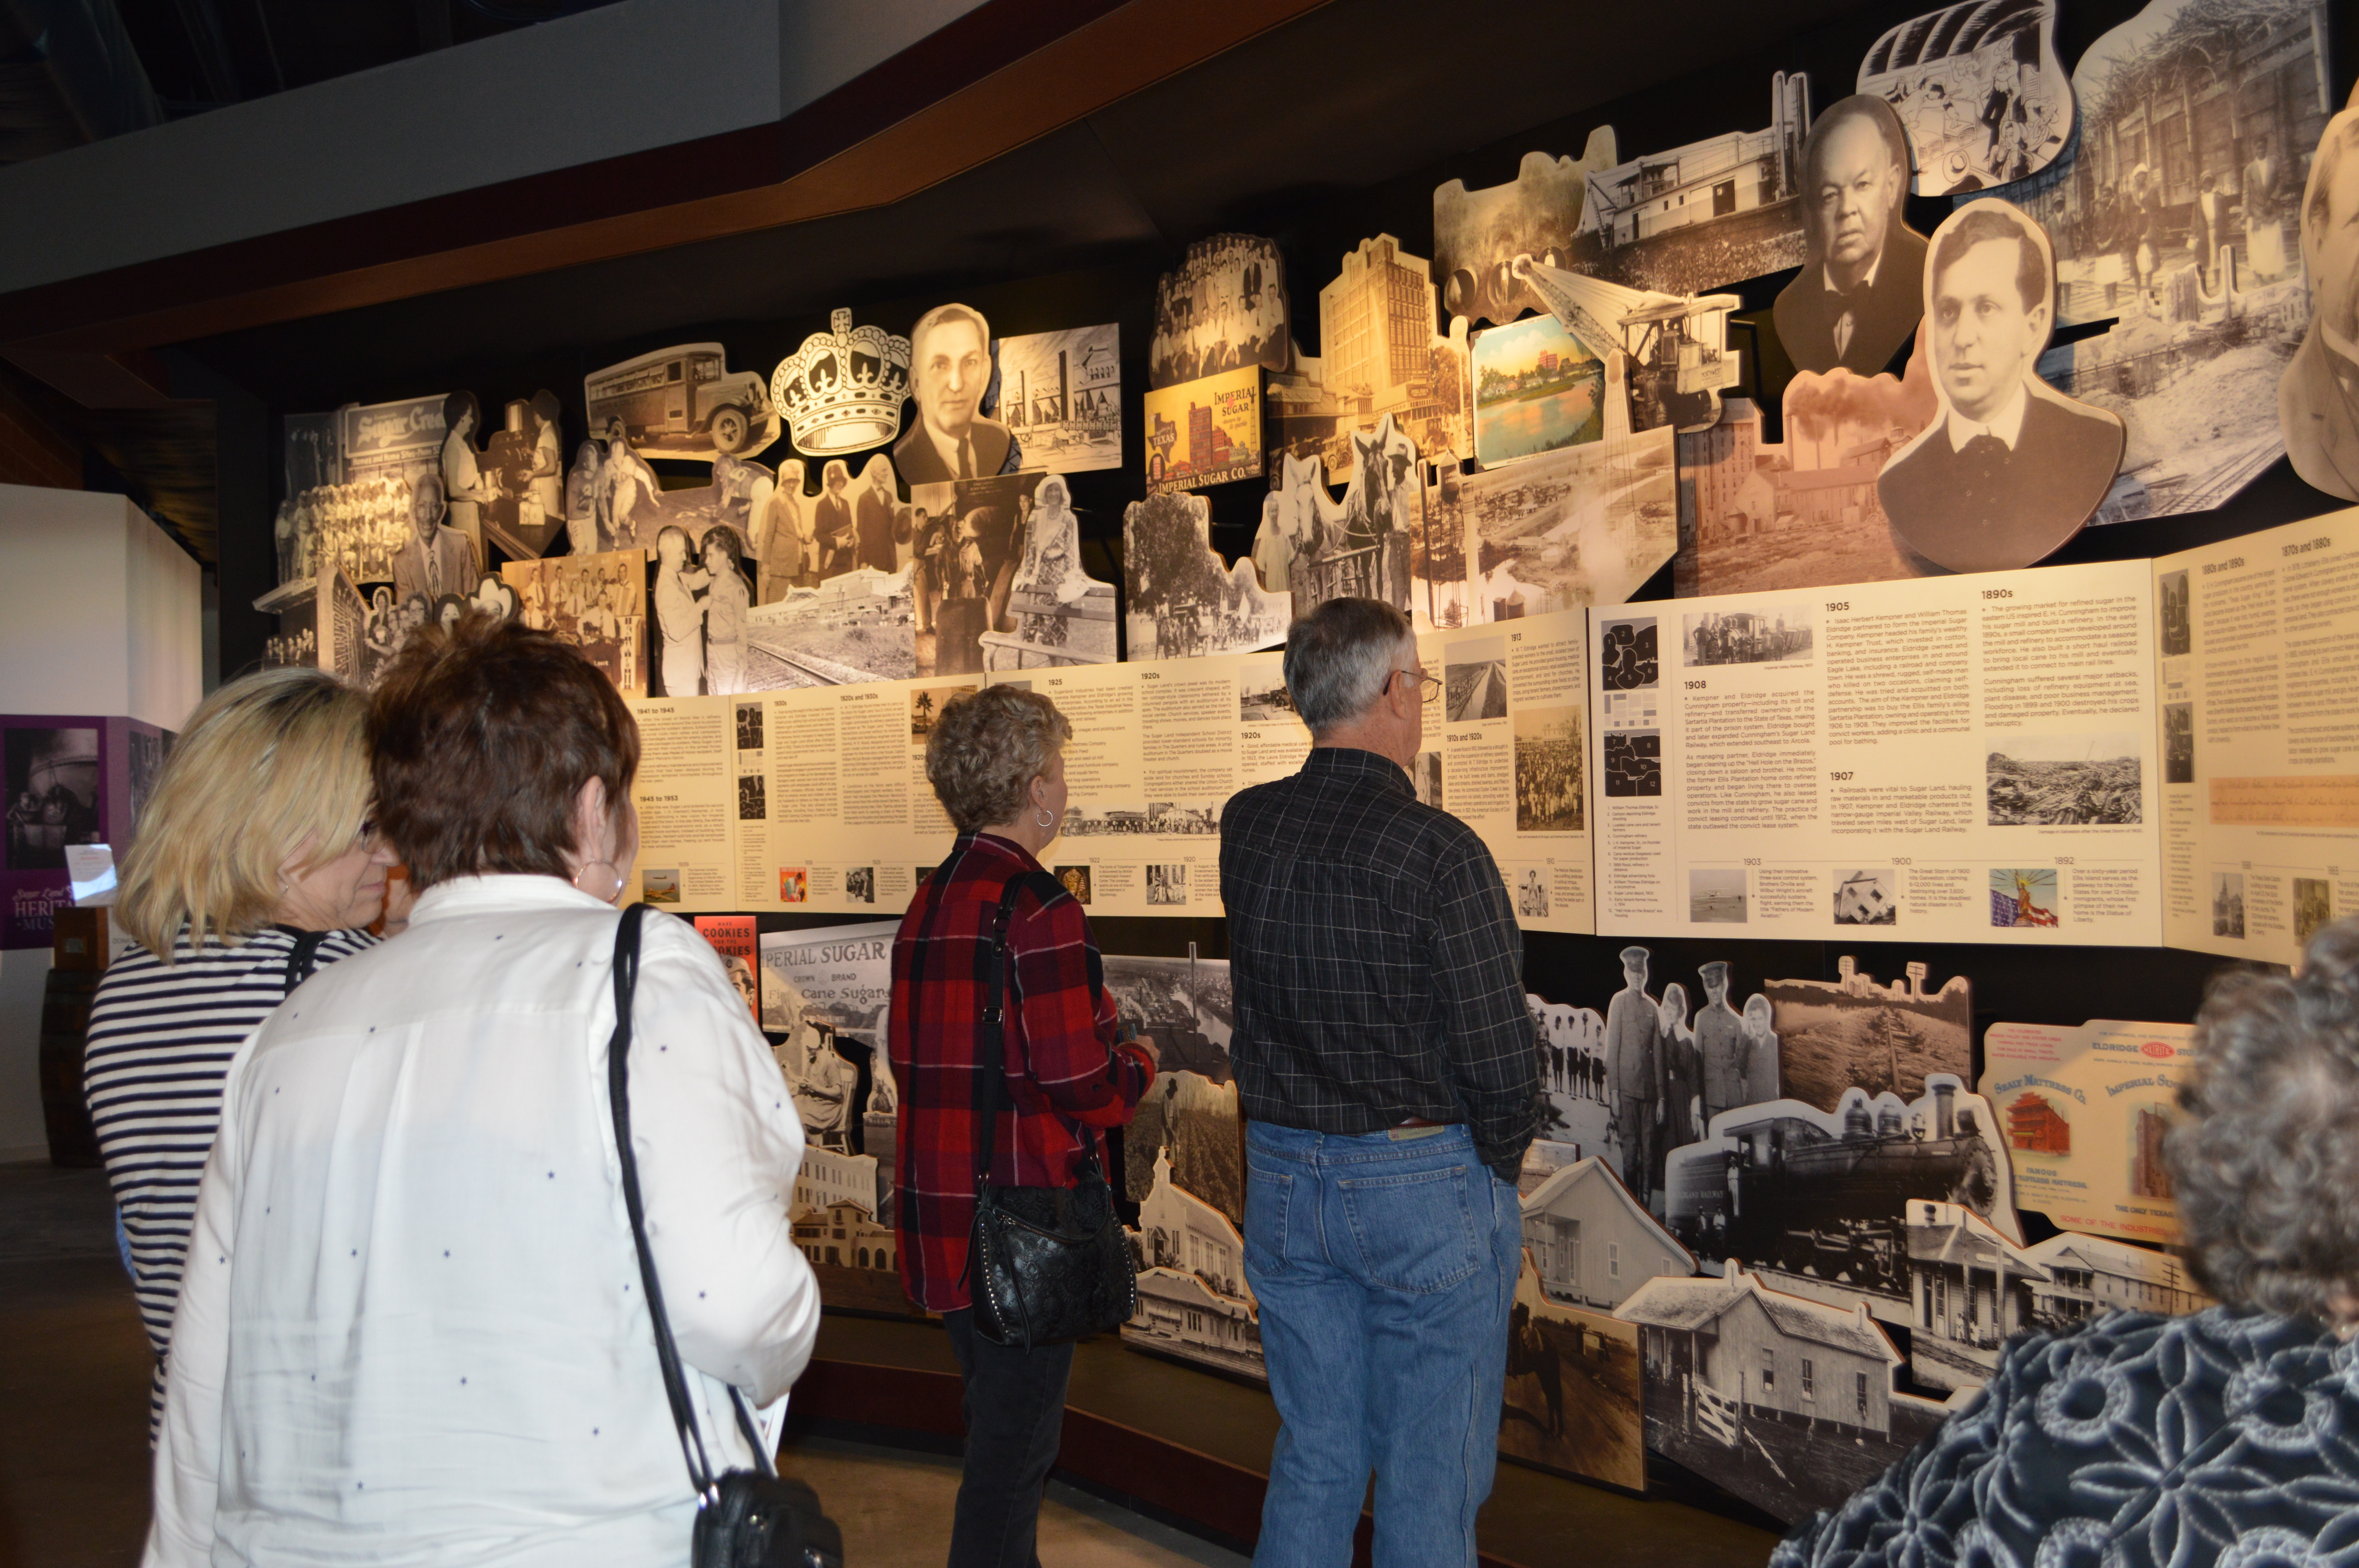 Guests viewing the Historical Timeline